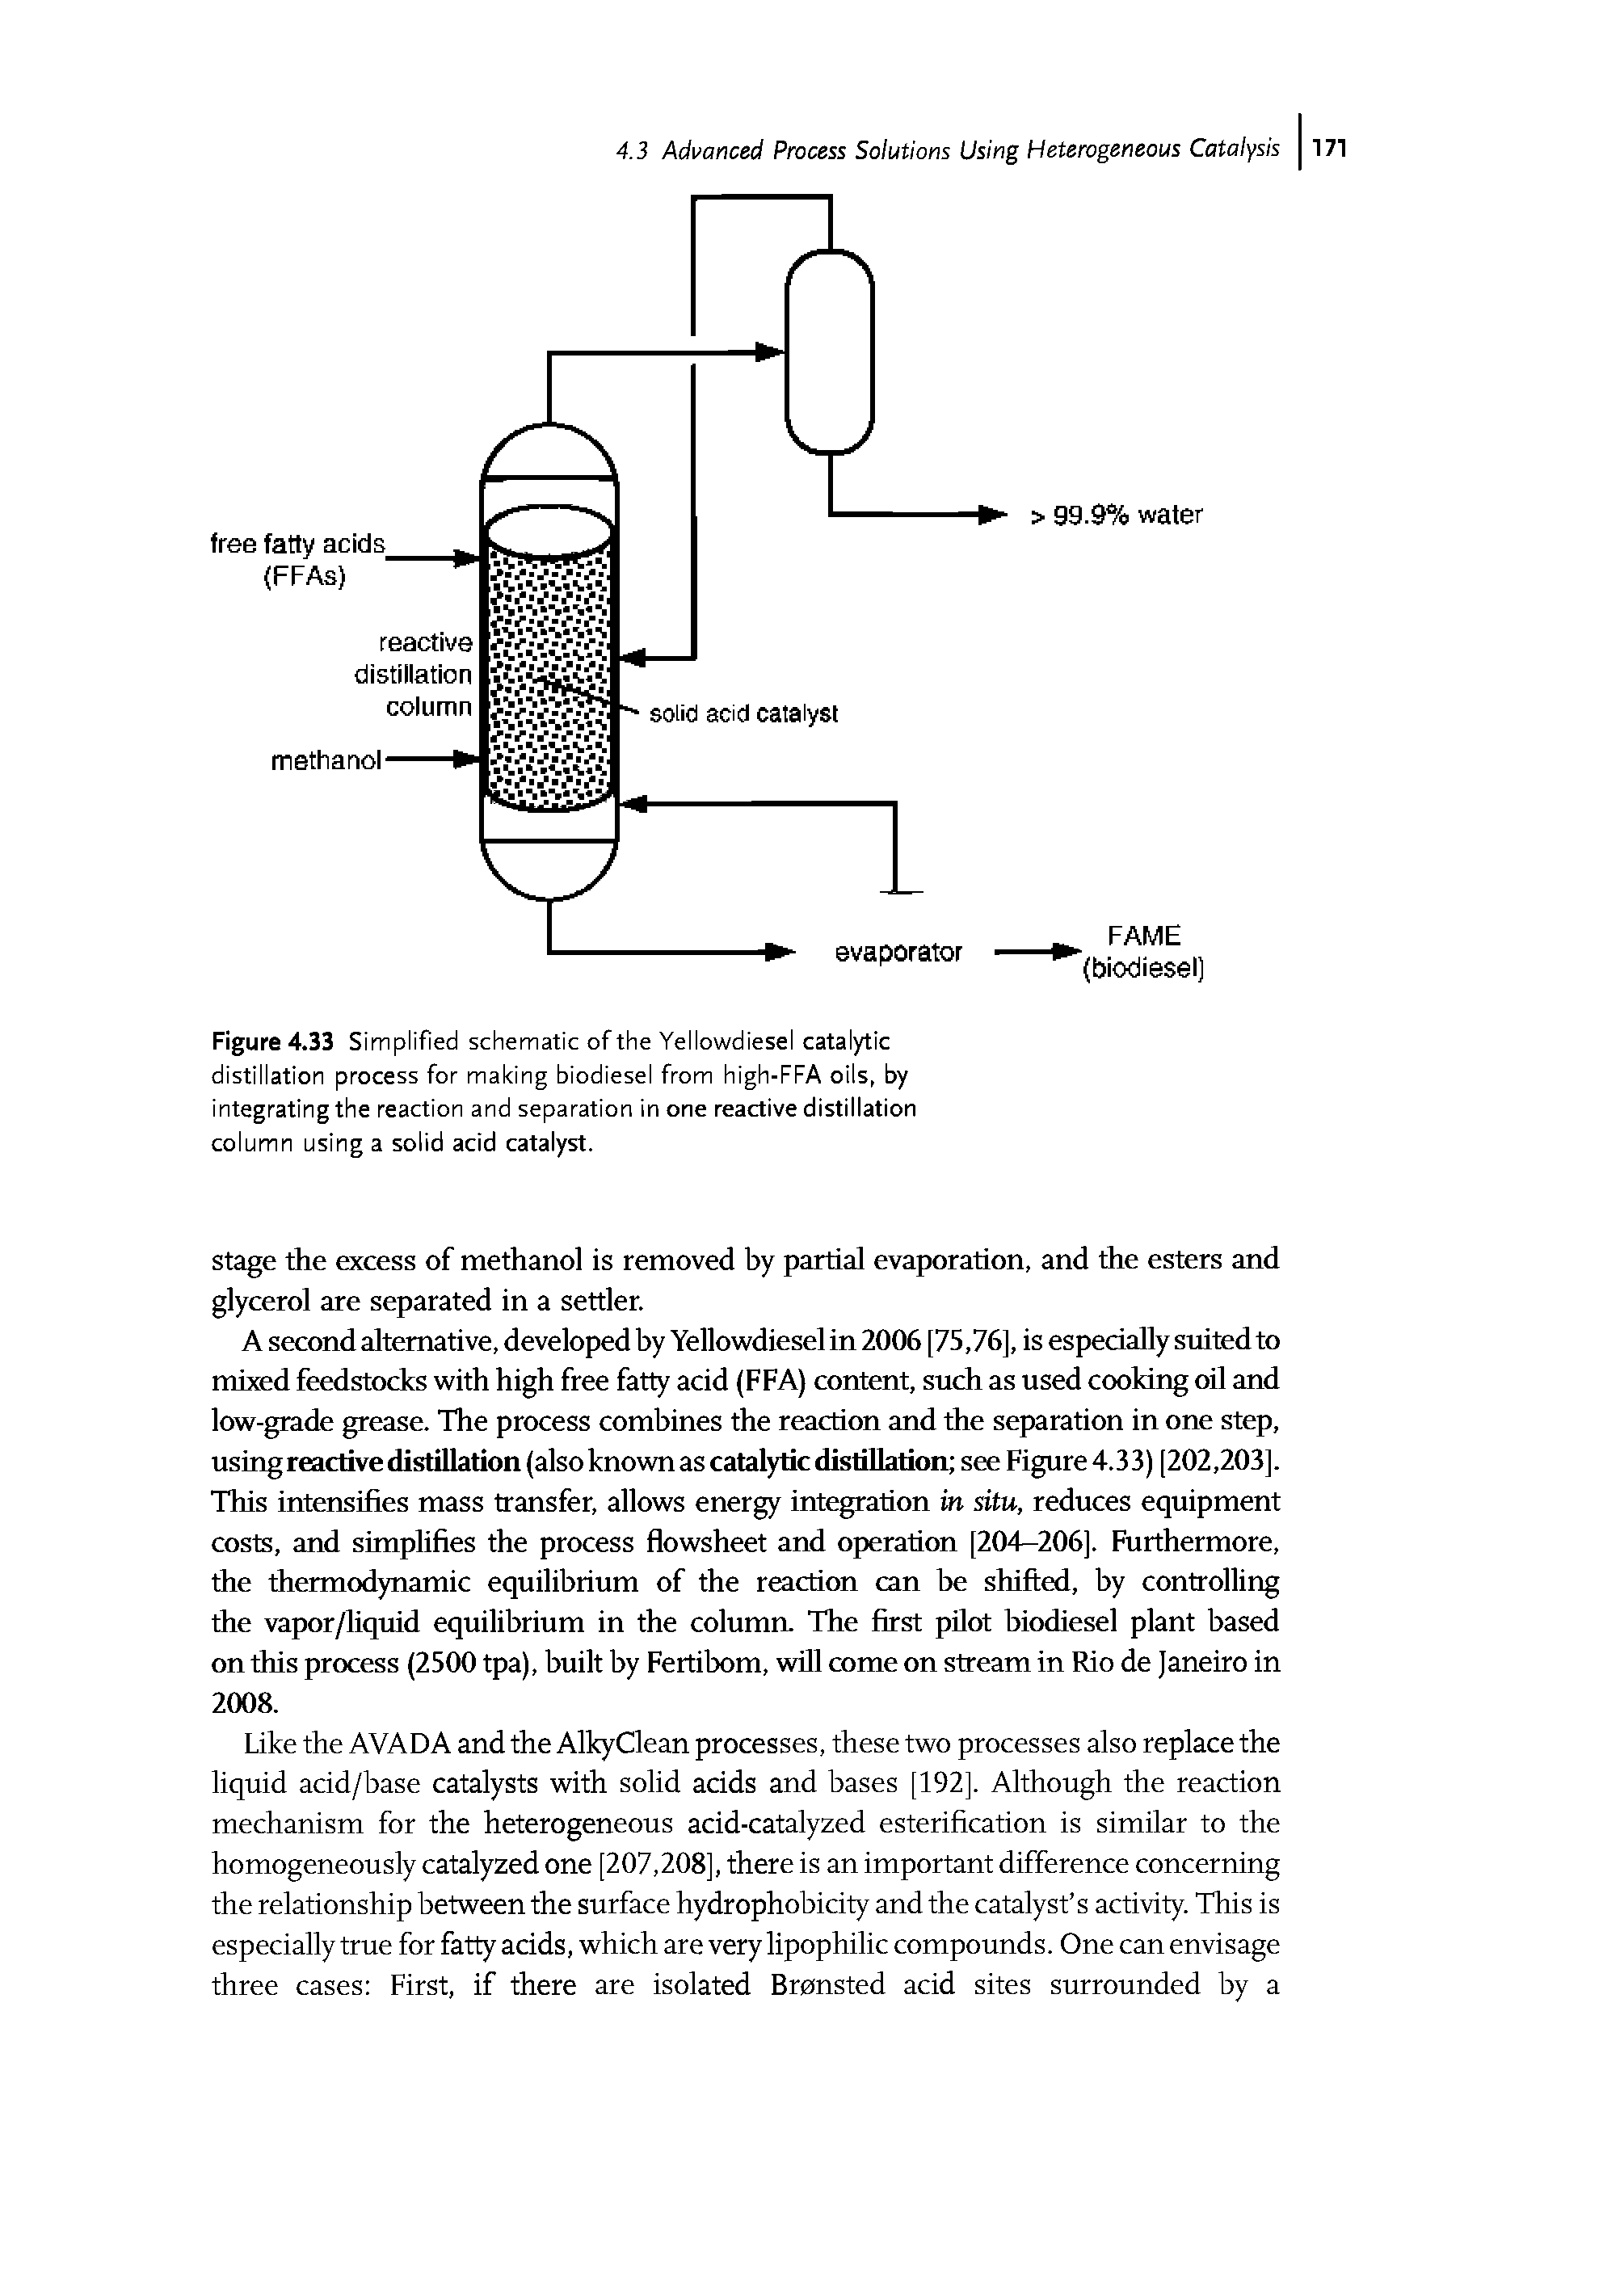 Figure 4.33 Simplified schematic of the Yellowdiesel catalytic distillation process for making biodiesel from high-FFA oils, by integrating the reaction and separation in one reactive distillation column using a solid acid catalyst.